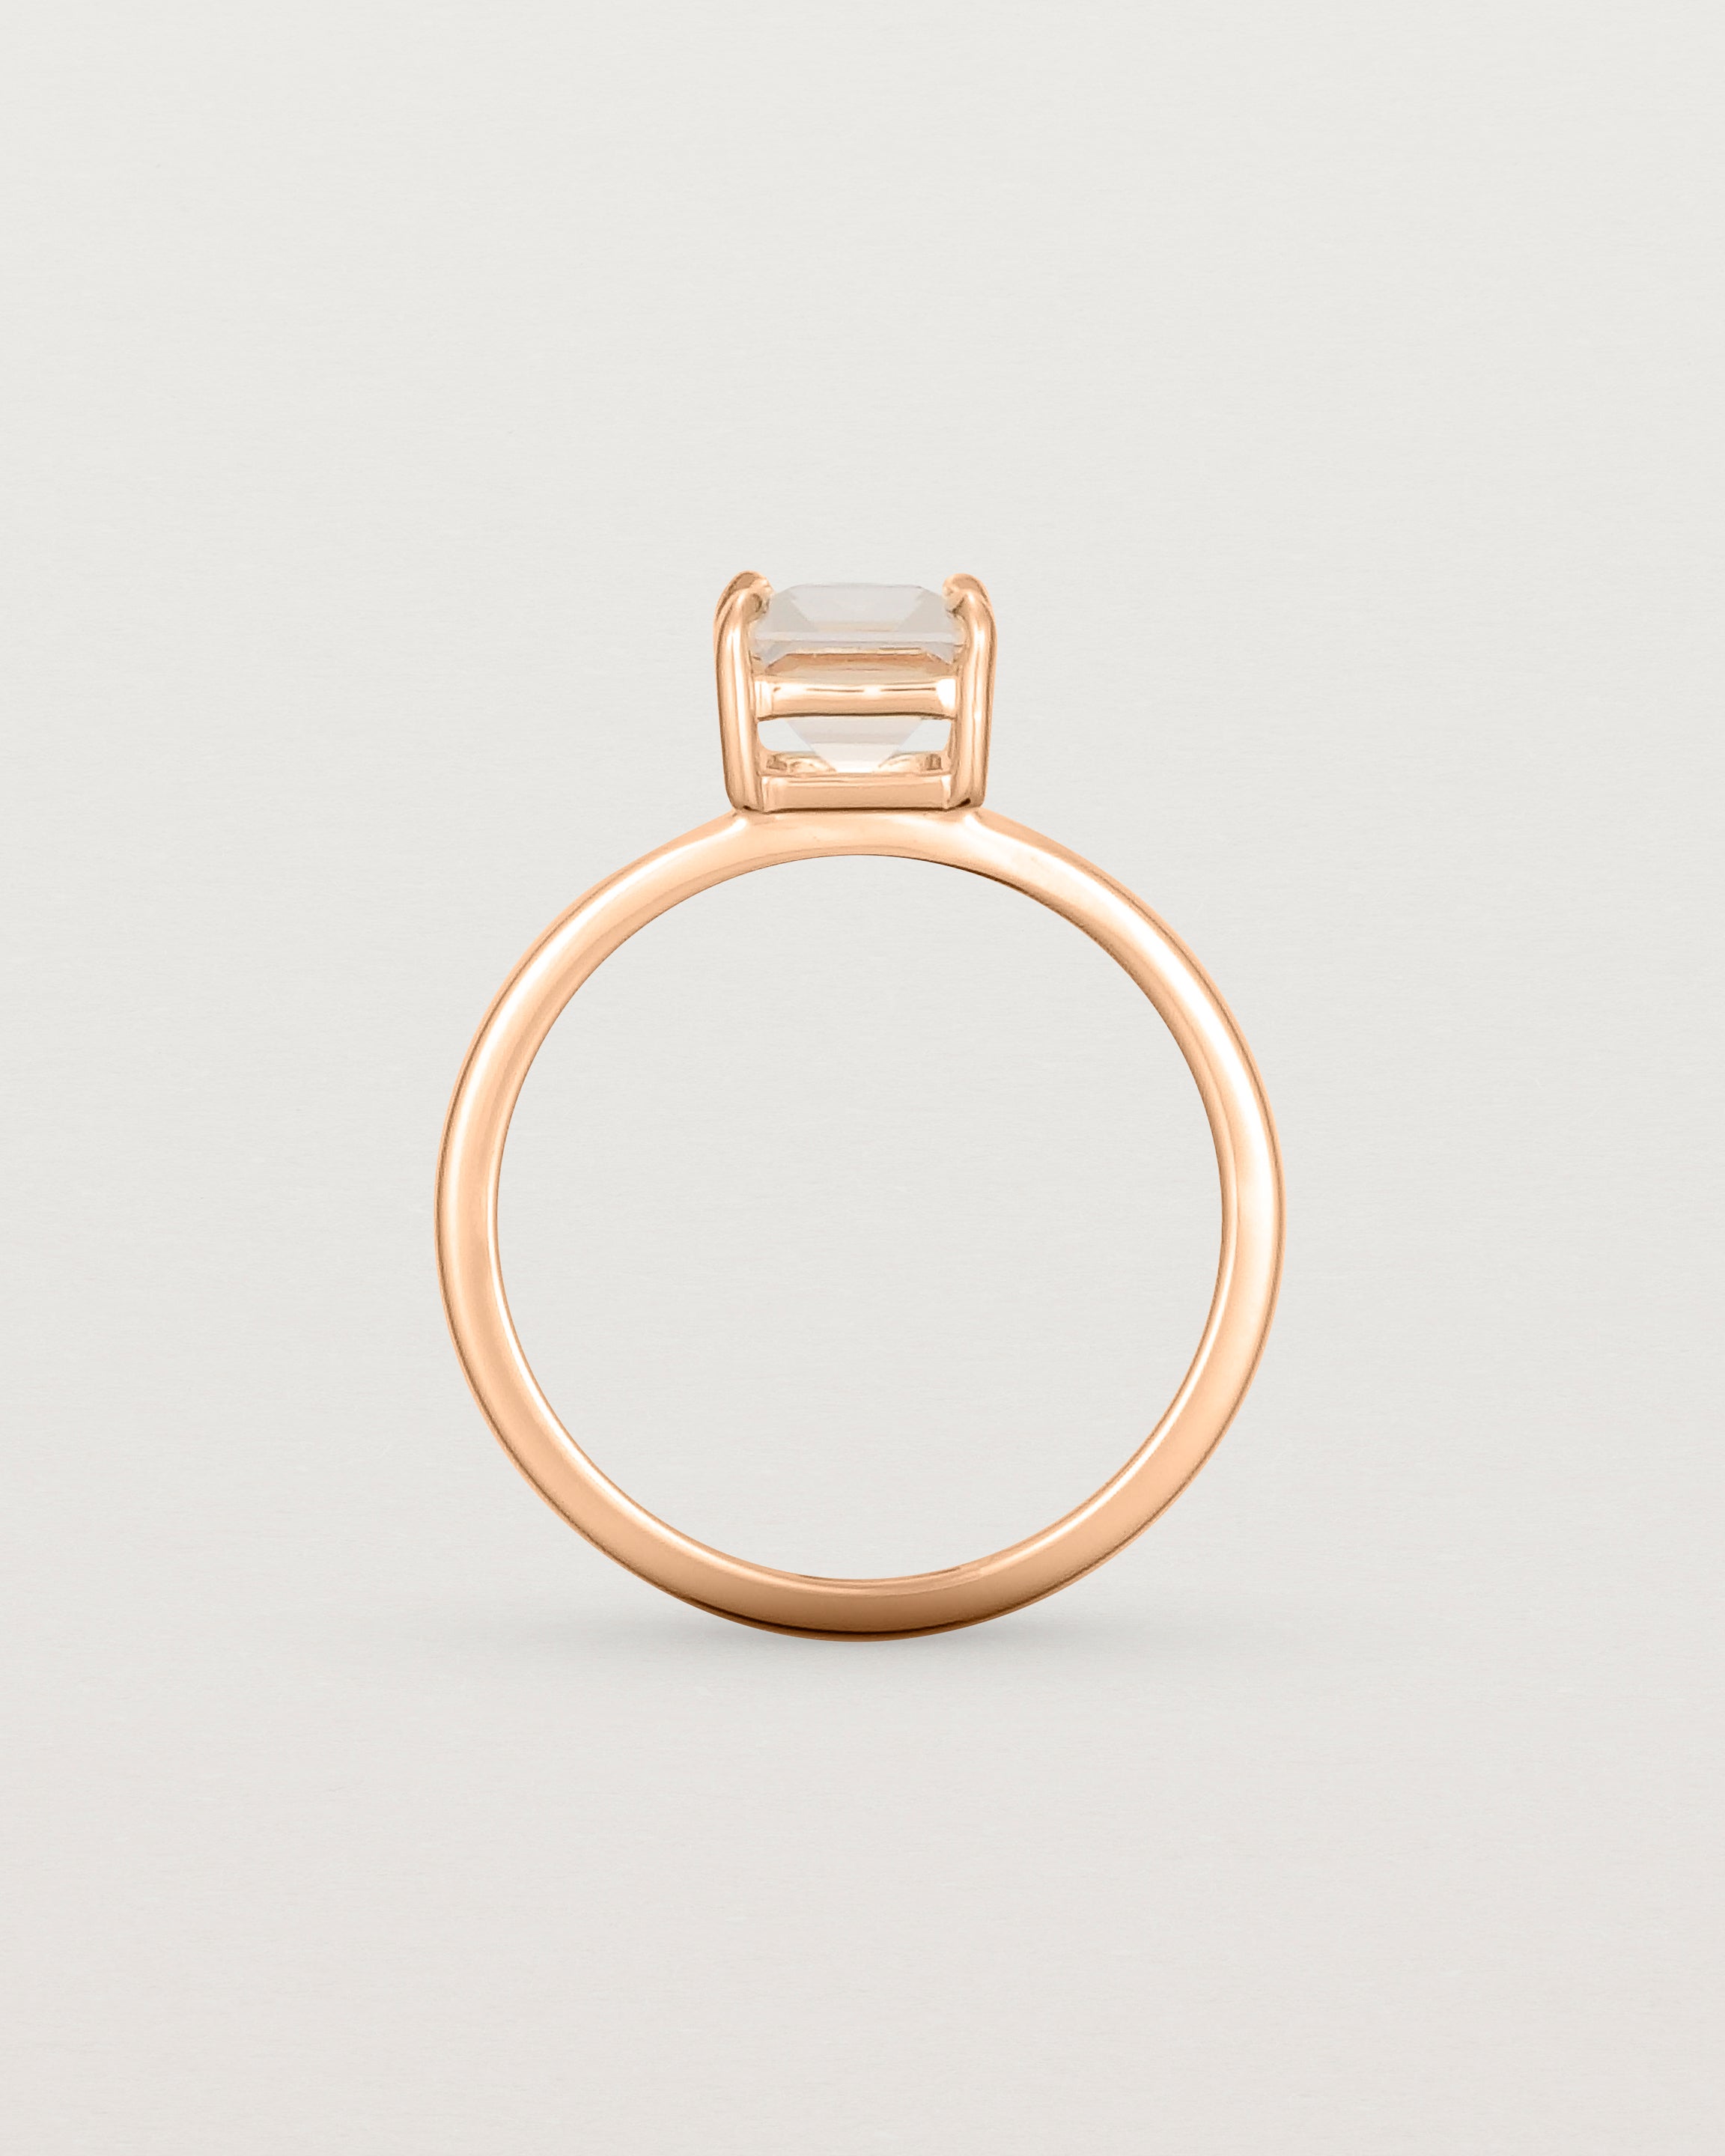 Standing view of the Una Emerald Solitaire | Morganite | Rose Gold.